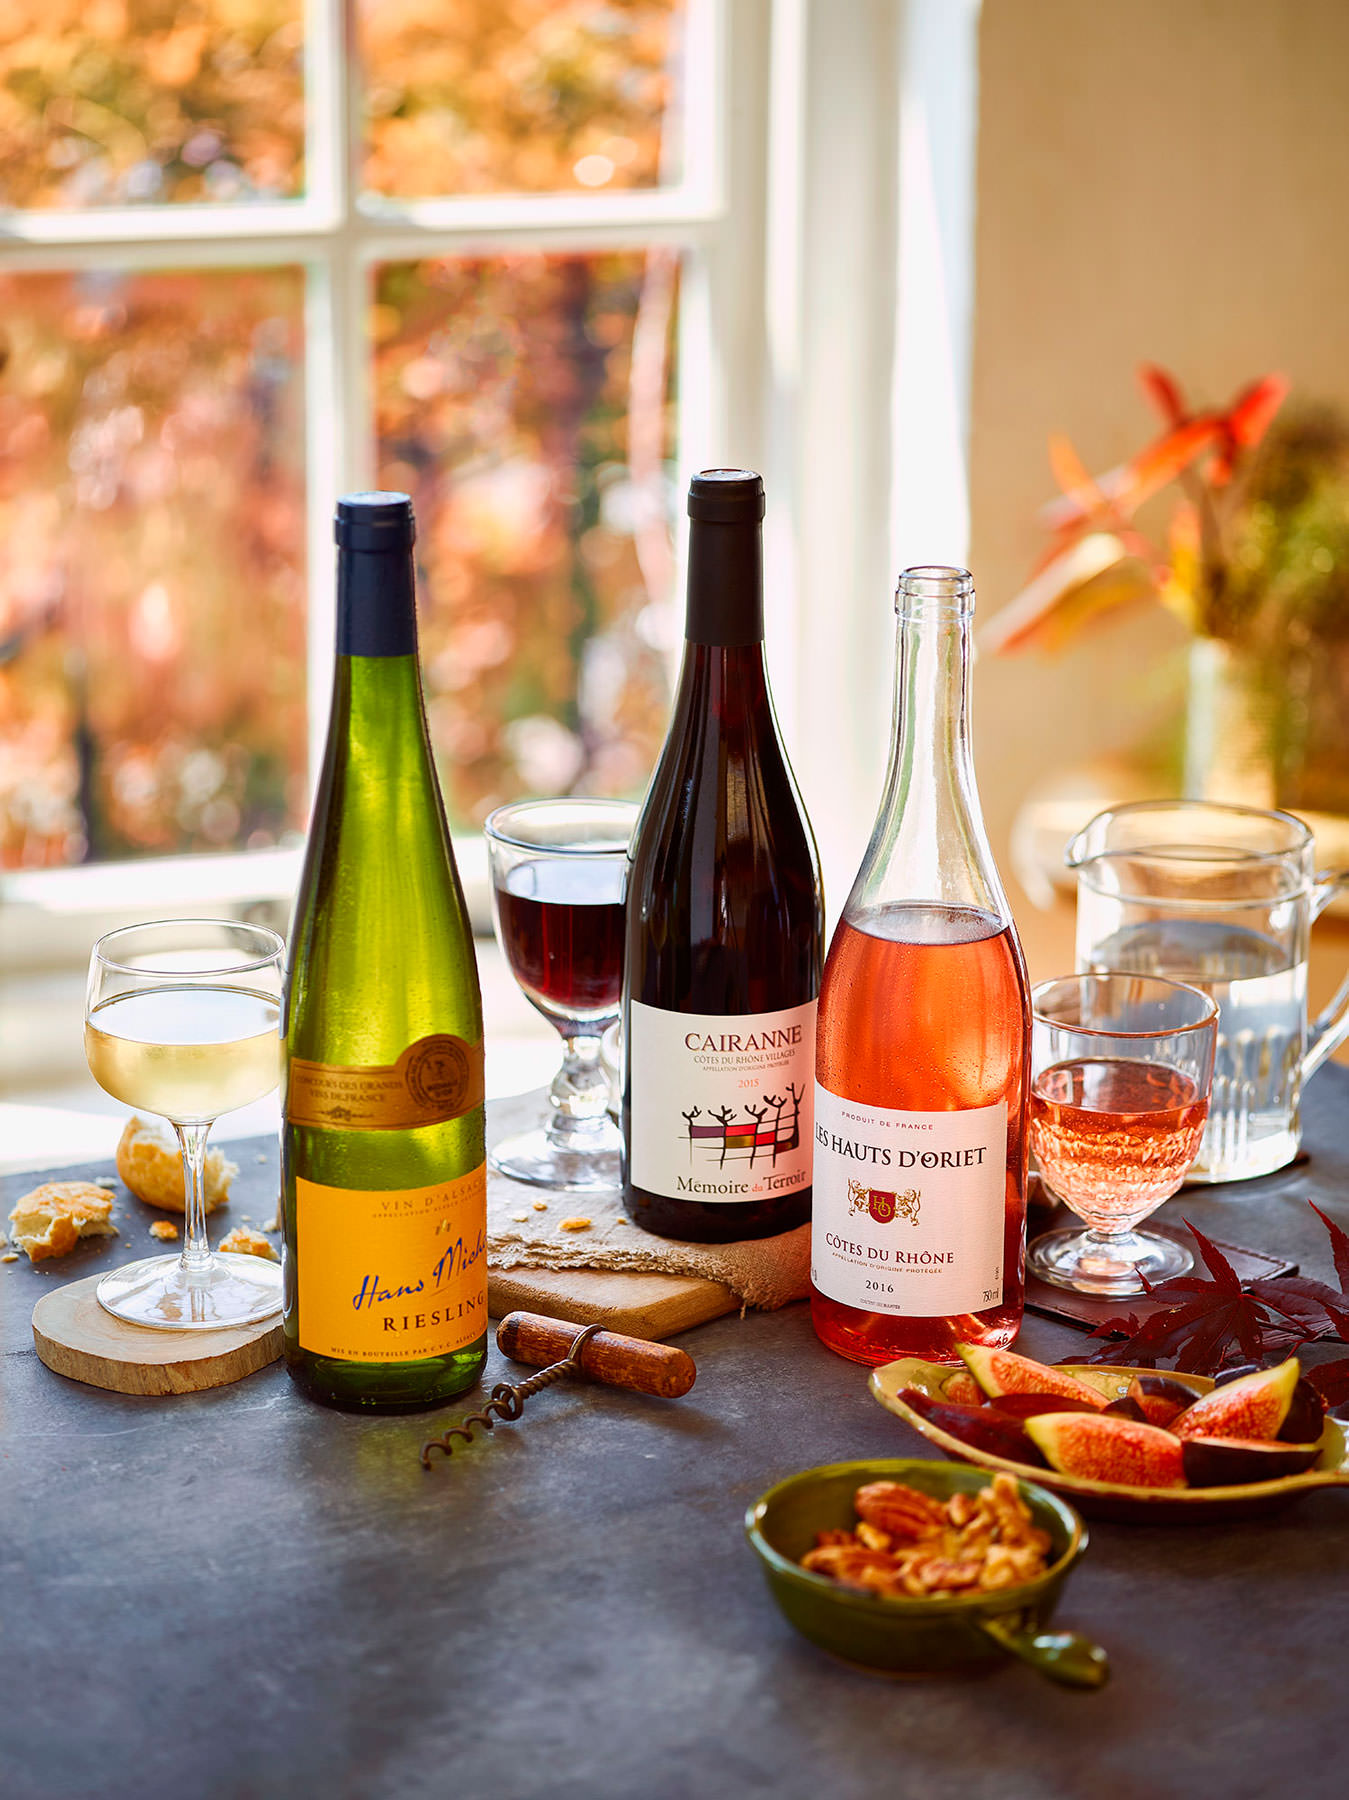 Bottles of wine arranged on a table with glasses with an autumnal setting - London Food & Drinks Photographer